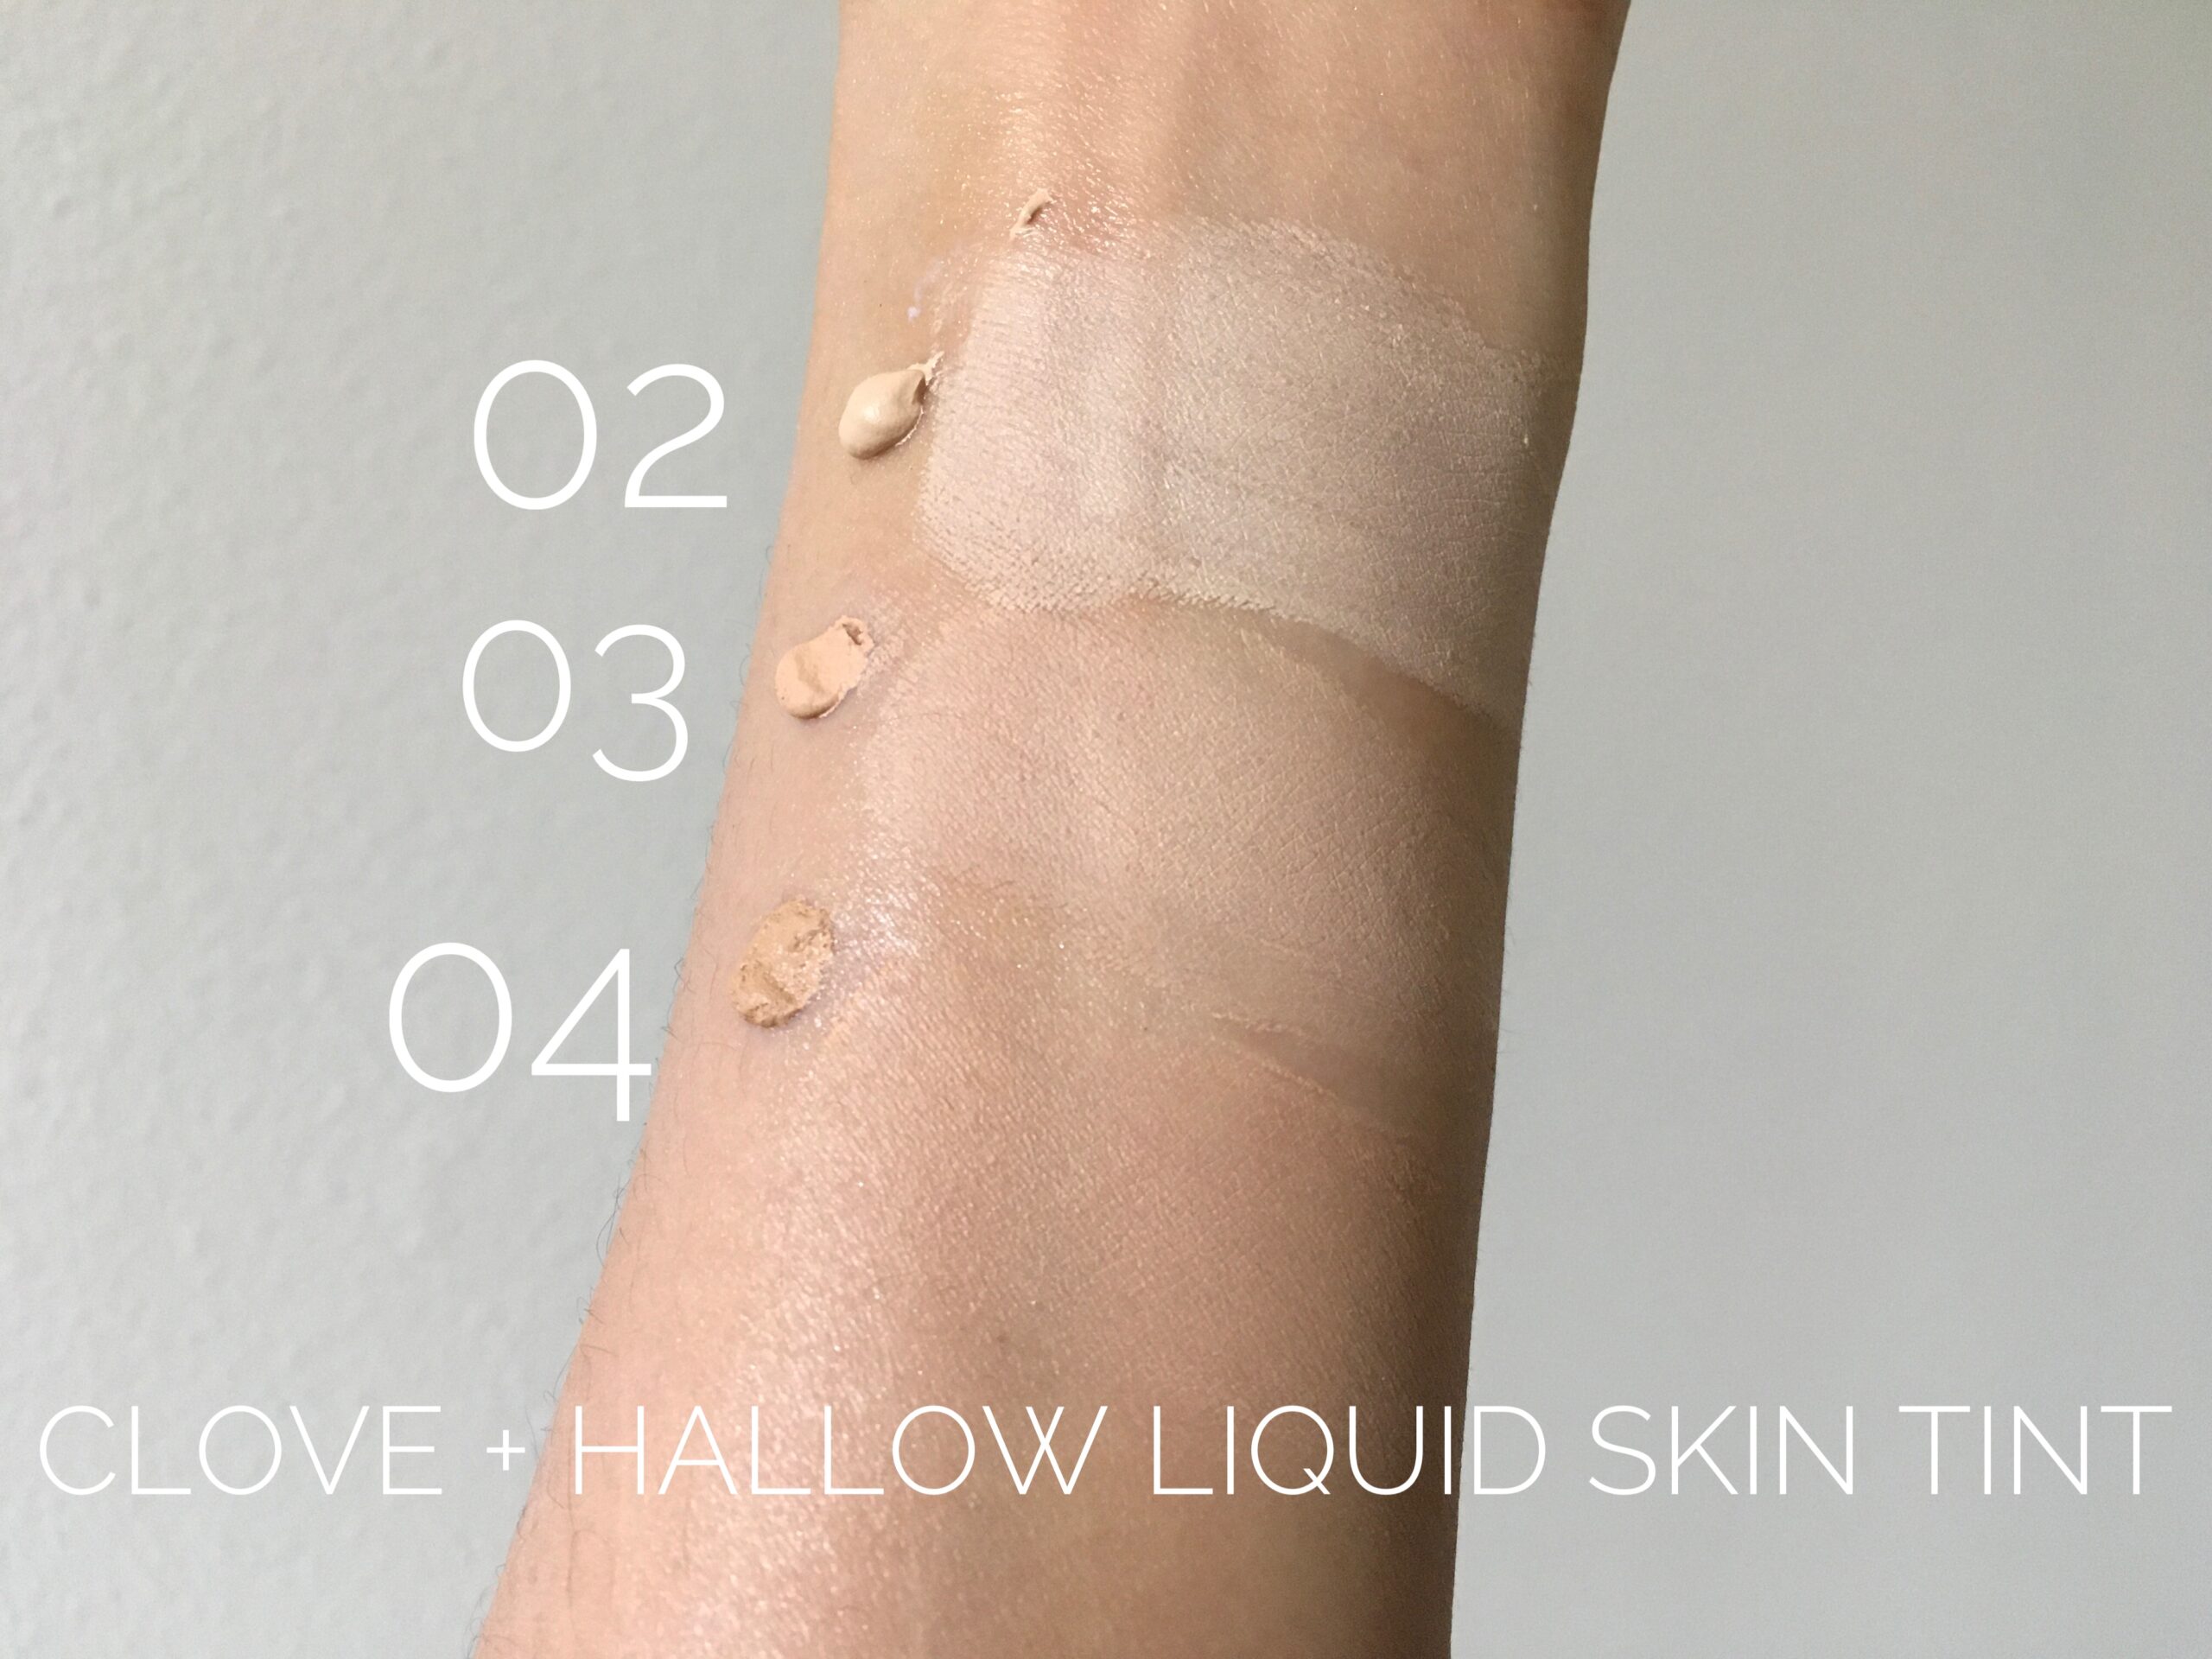 Clove and hallow liquid skin tint swatches